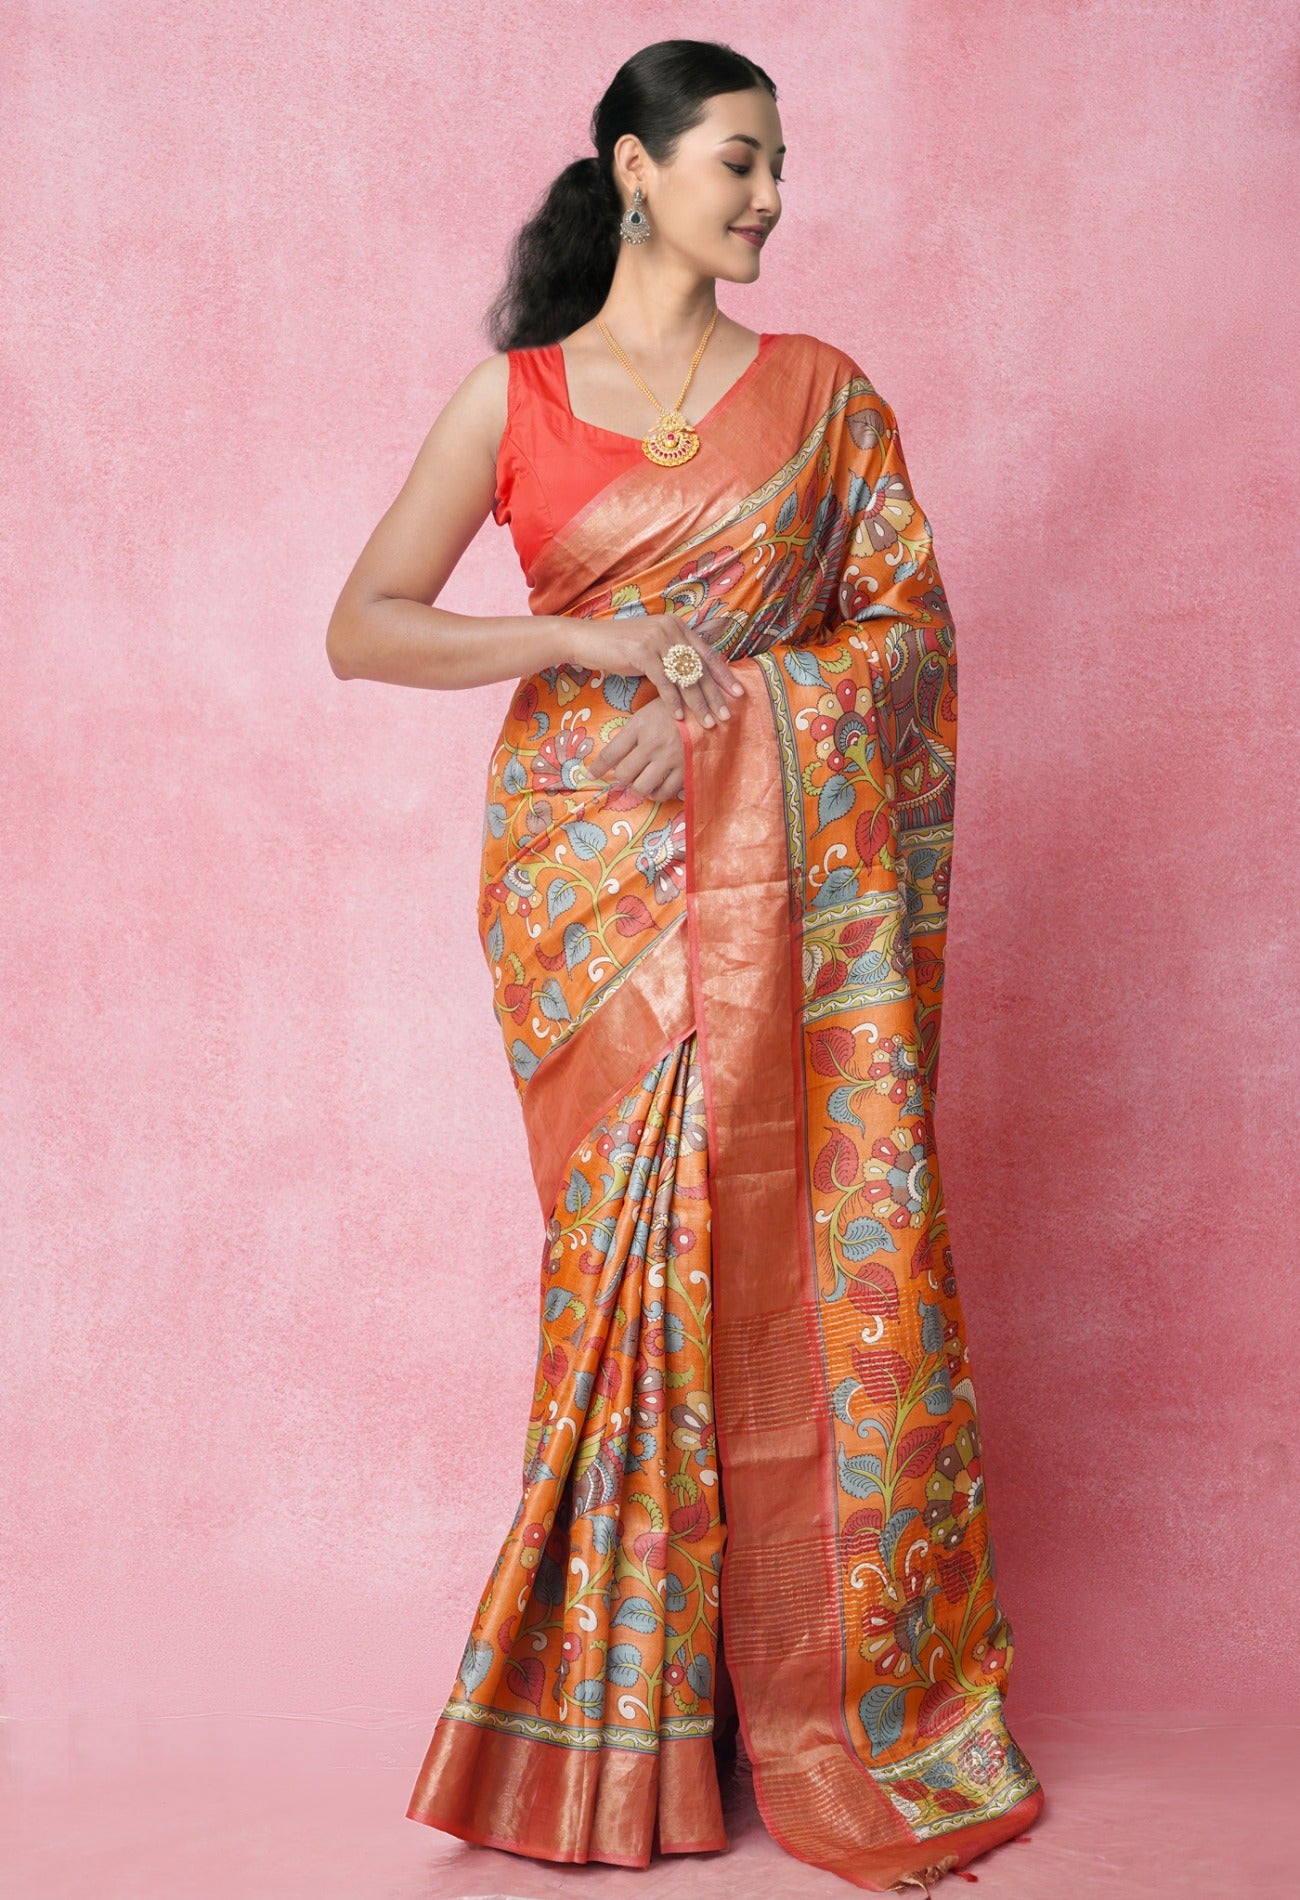 Online Shopping for Orange Pure Handloom Bengal Tussar Silk Saree with Hand Block Prints from West Bengal at Unnatisilks.com India
